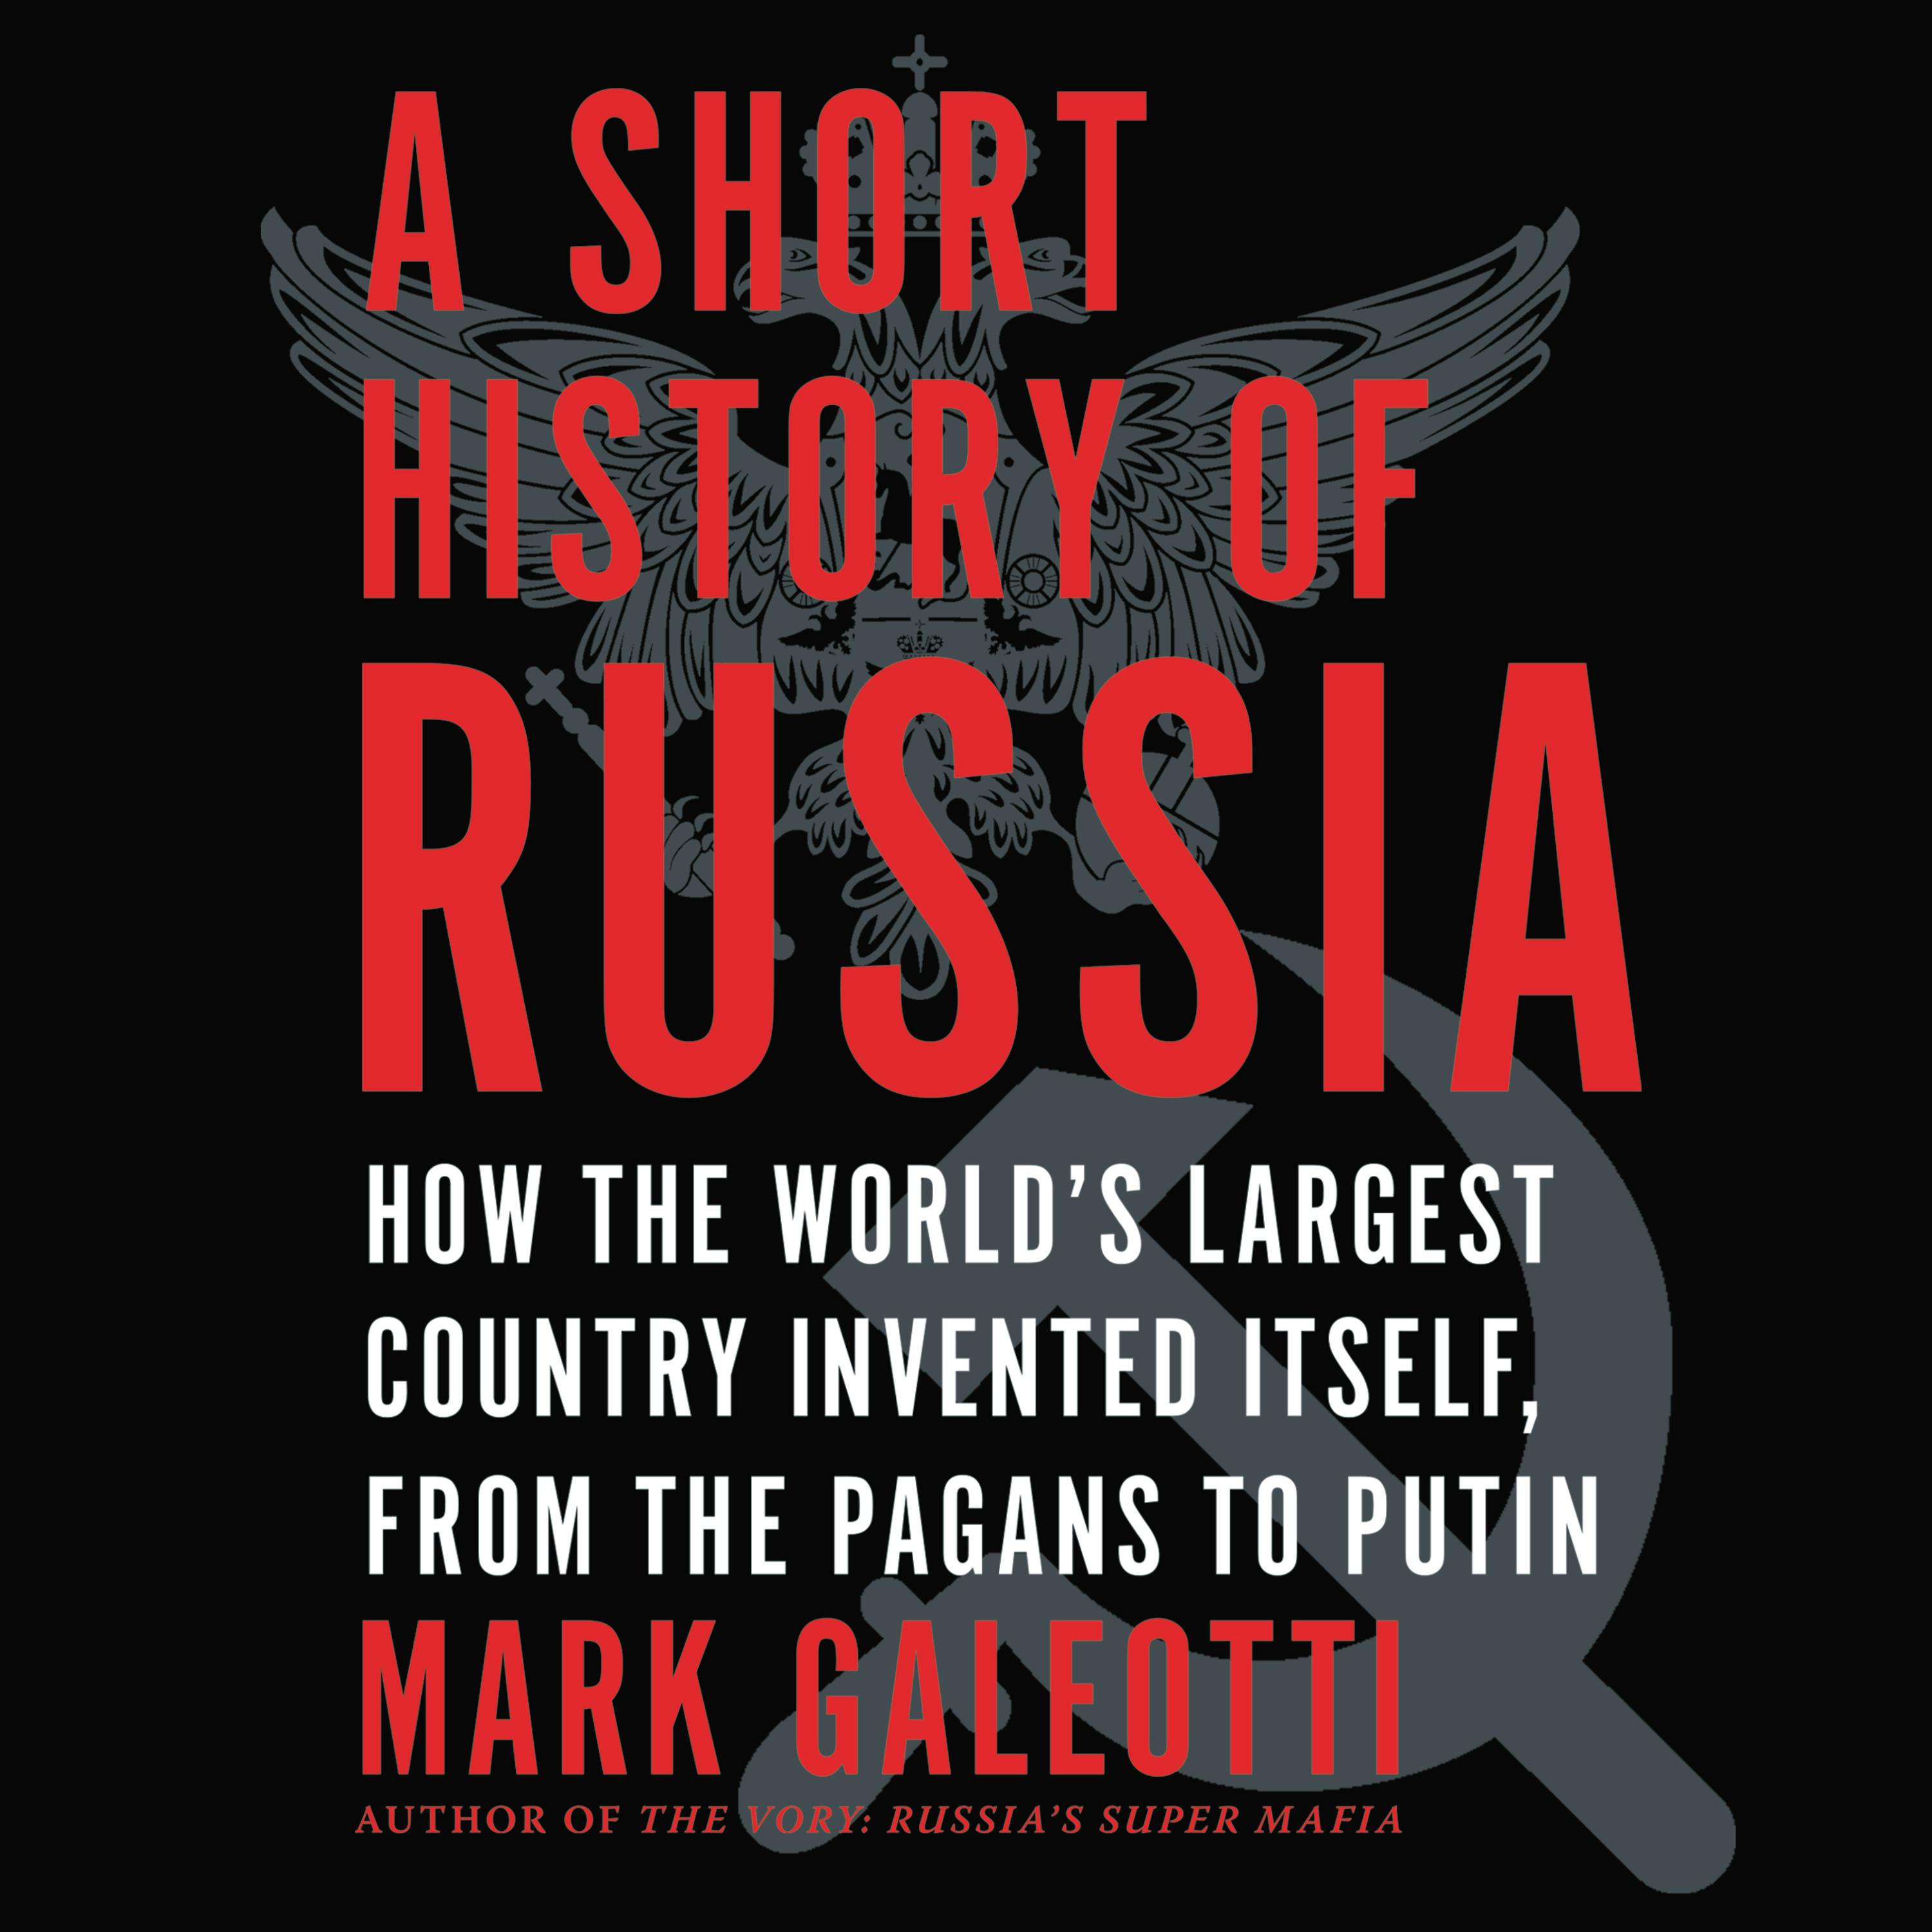 A Short History of Russia: How the World's Largest Country Invented Itself, from the Pagans to Putin - Mark Galeotti